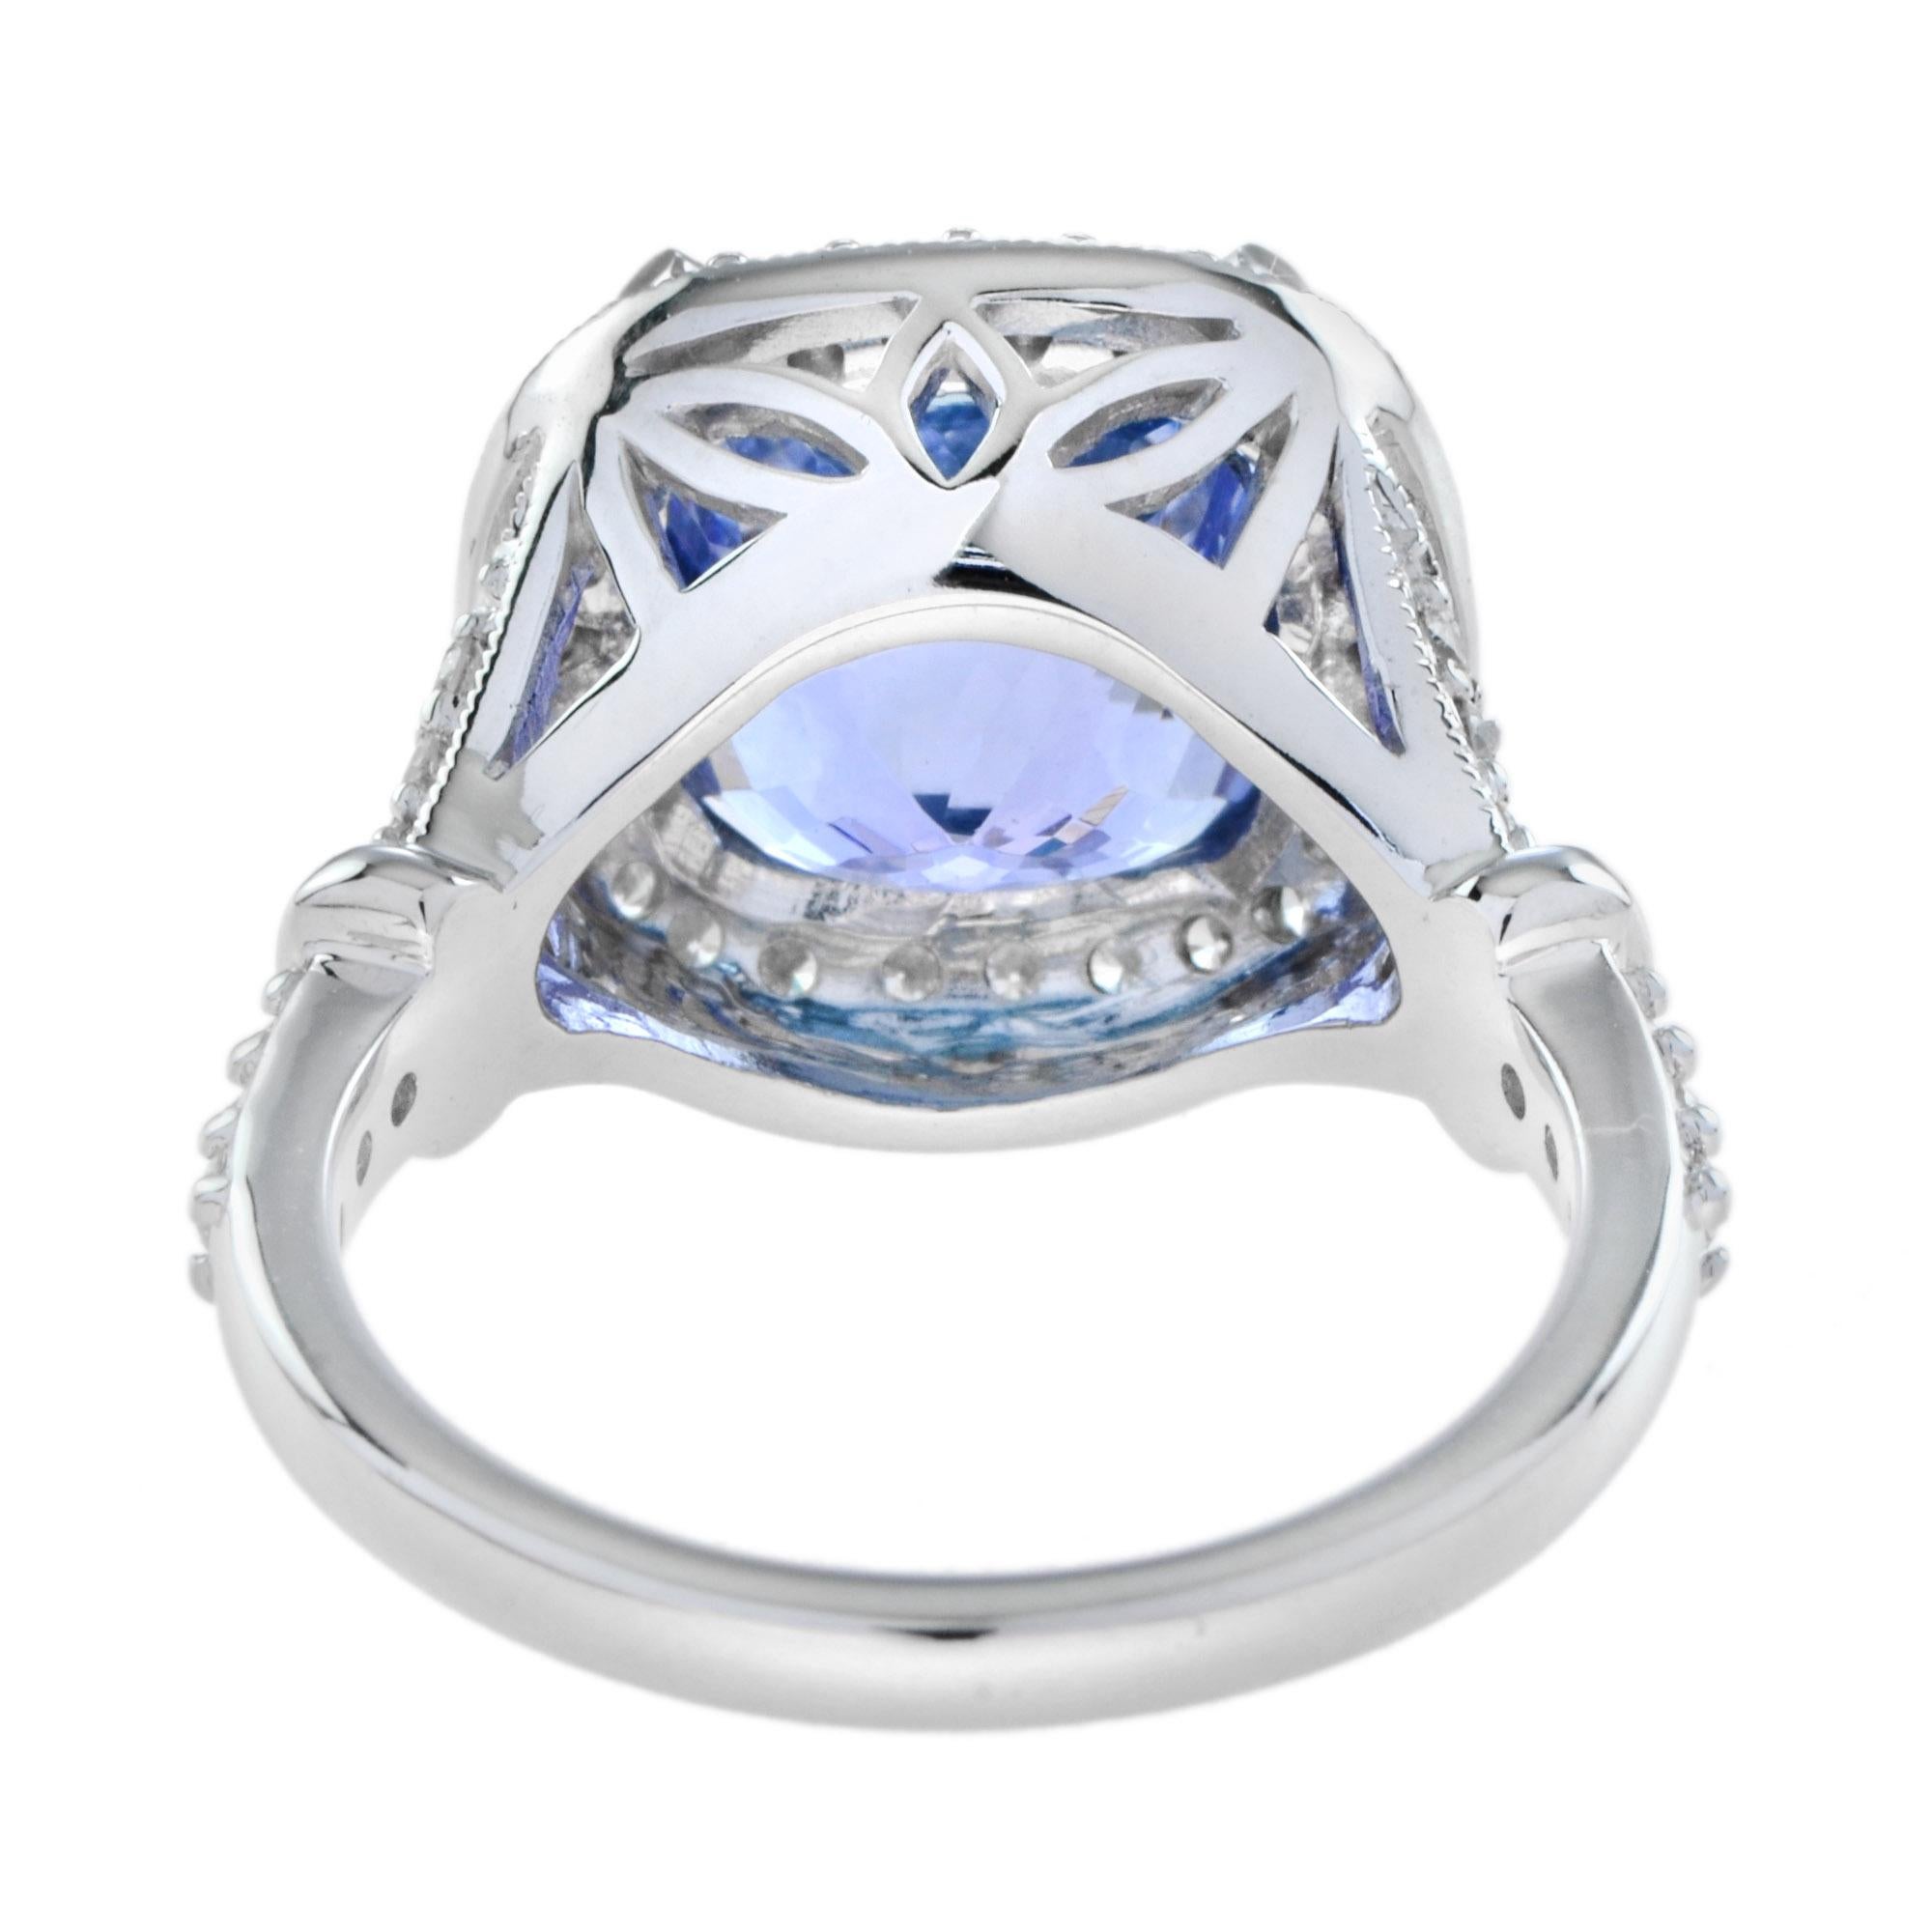 Certified 6.68 Ct. Cushion Tanzanite Diamond Engagement Ring in 18K White Gold For Sale 1